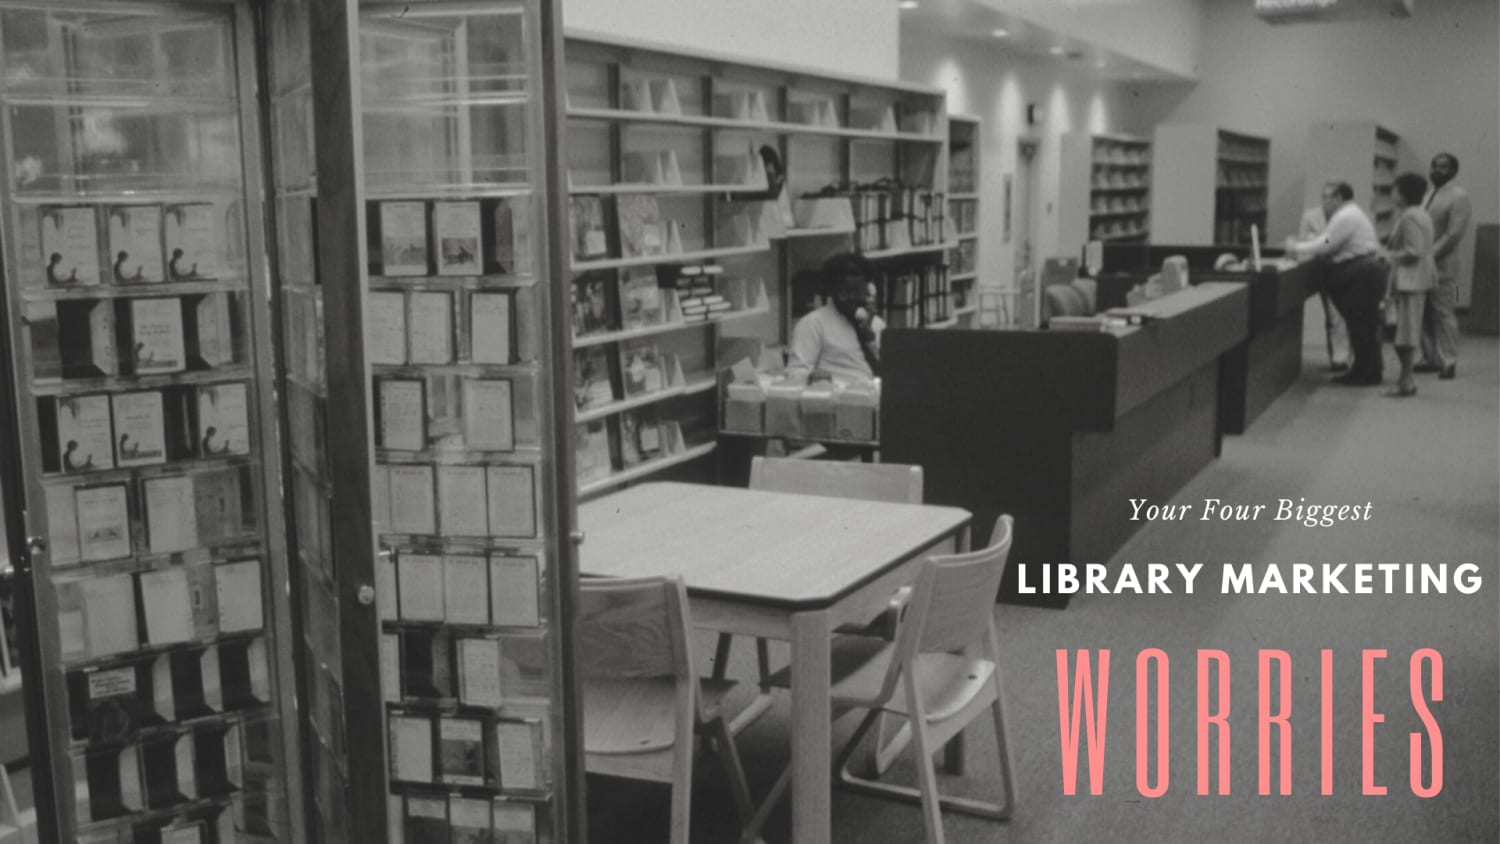 Worries in the Library World: Here are Answers to Your Four Biggest Library Marketing Concerns Right Now!